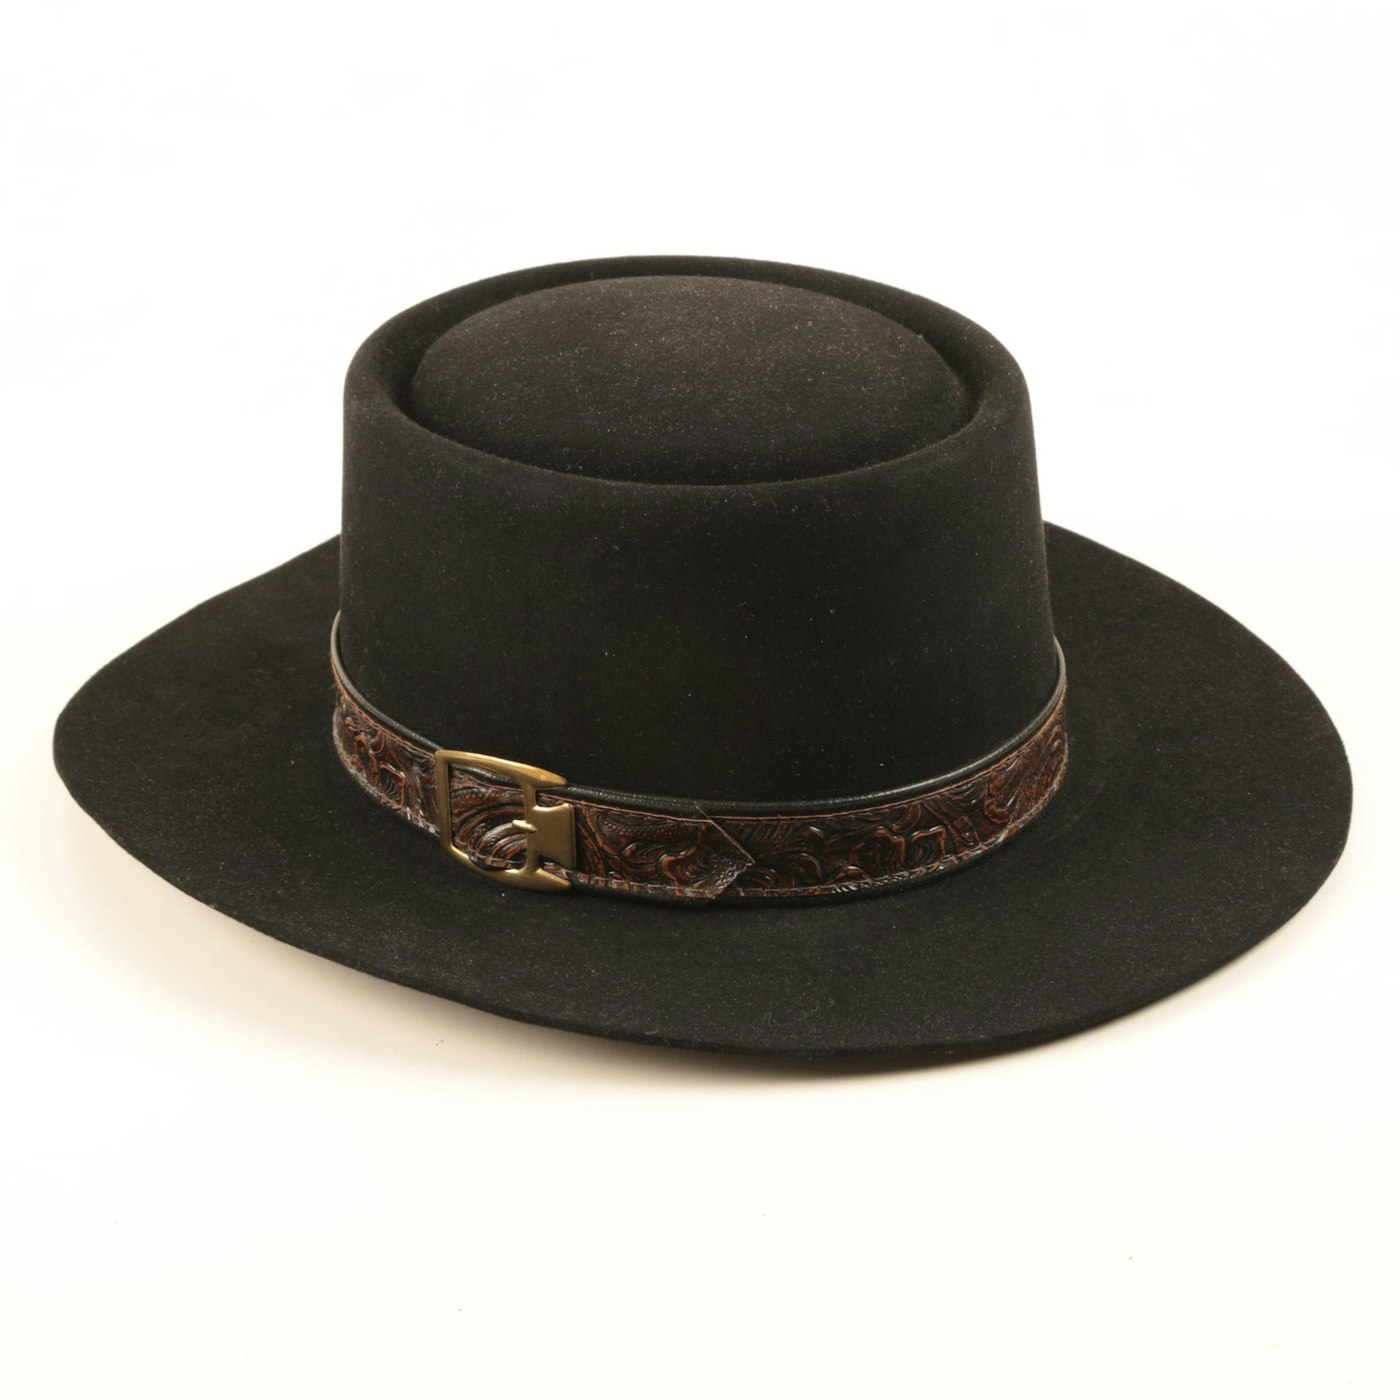 Stetson Beaver Hat 4x - How To Blog